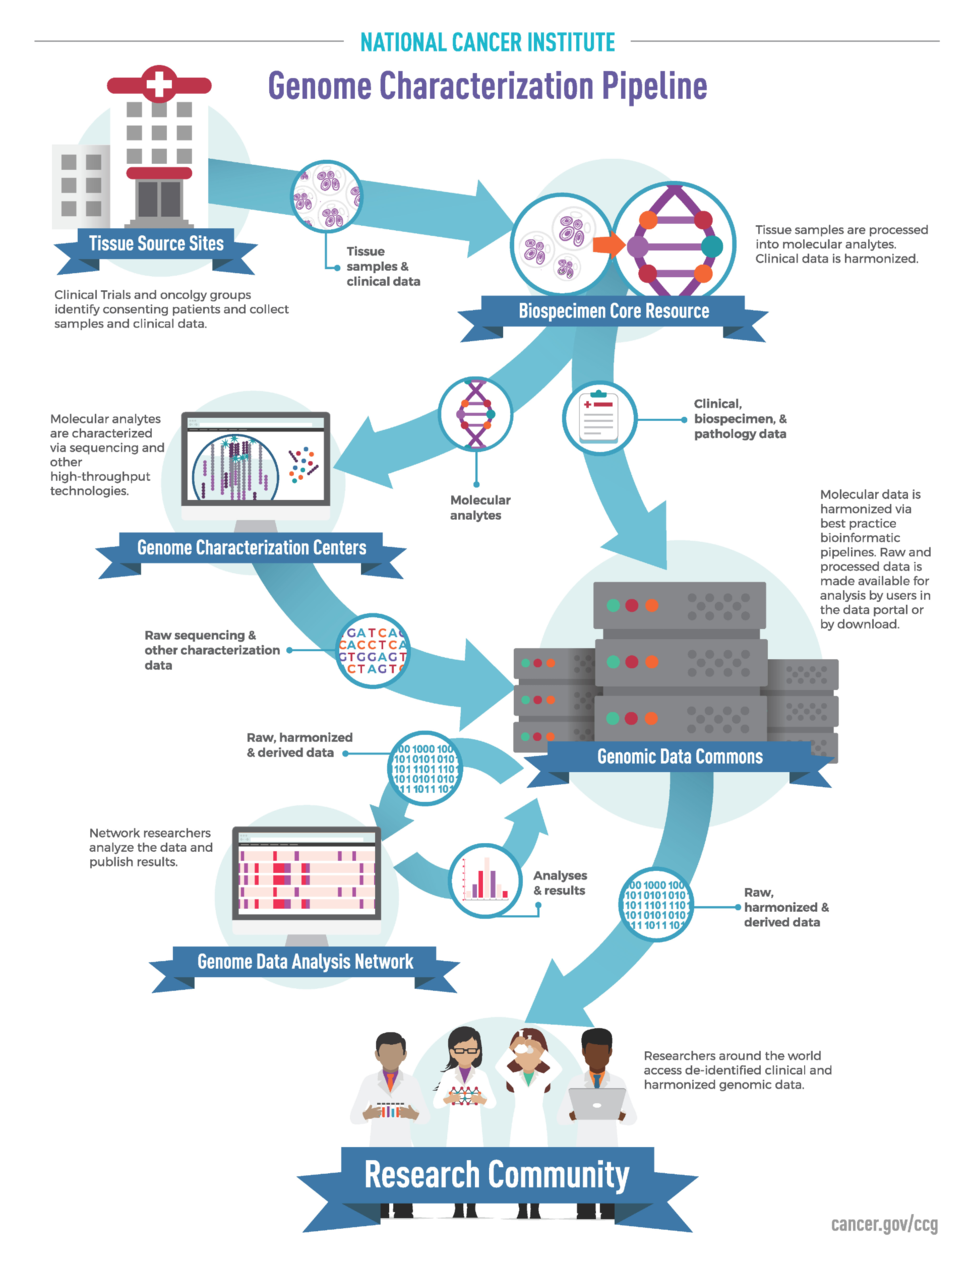 NCI Genome Characterization Pipeline. Shows the path from Tissue Source Sites to Biospecimen Core Resource to Genome characterization Centers or directly to Genomic Data Commons. Then to Genome Data Analysis and back to Genomic Data Commons  and then onto Research Community.